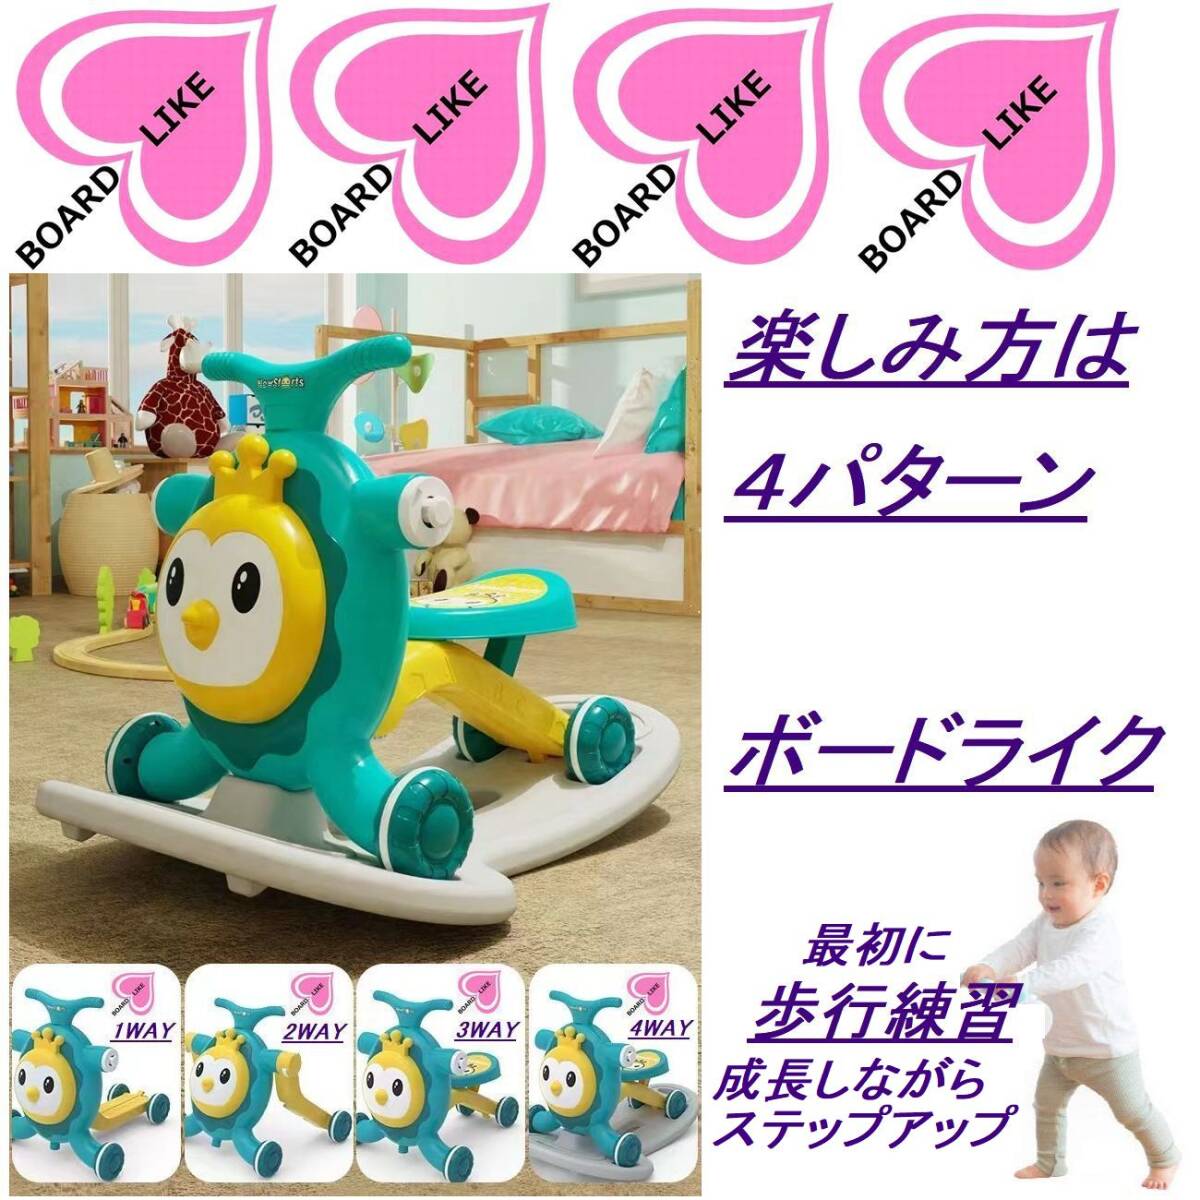  green #80% off . prompt decision,4WAY# first in Japan #10 pcs limit # baby-walker # baby War car # board Like # scooter # rocking chair -# wooden horse 